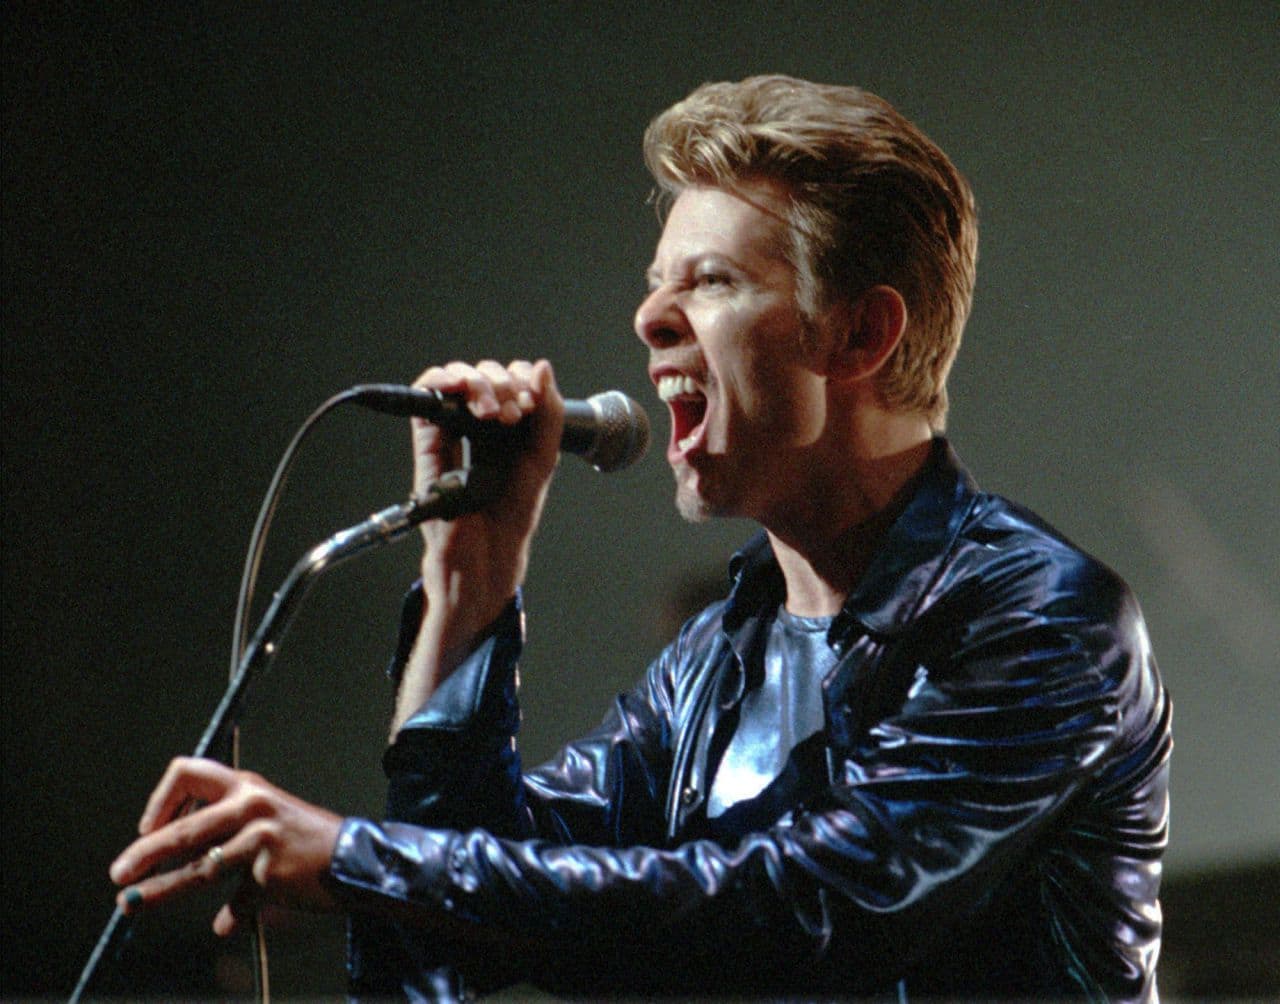 David Bowie sings during a concert appearance in Hartford, Conn. in September 1995. (Bob Child/AP)